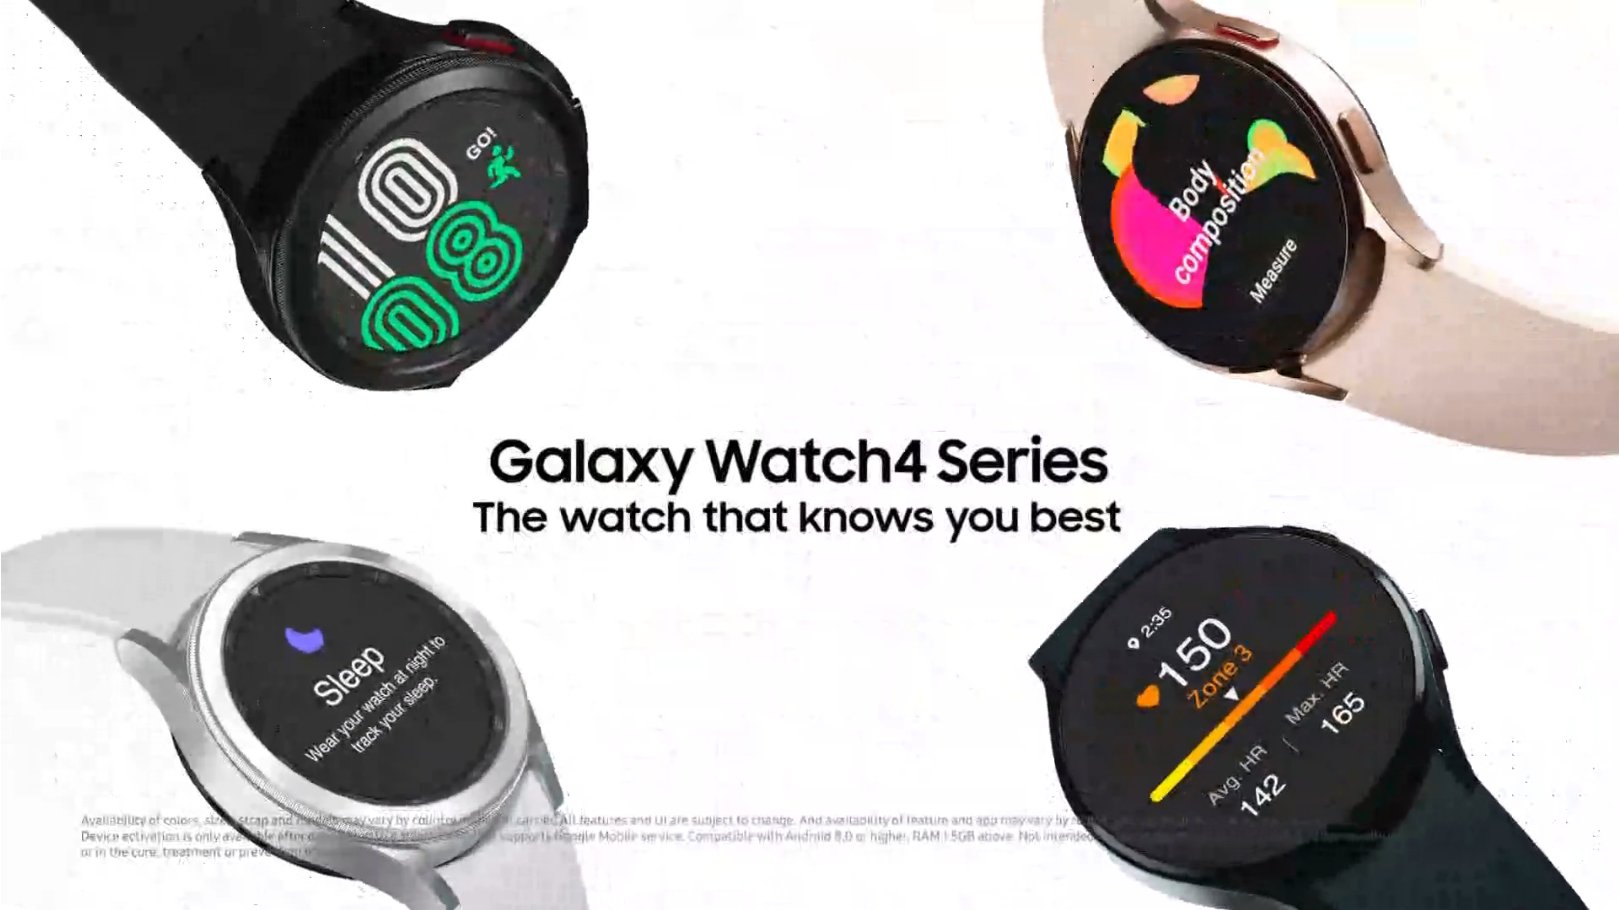 walvis maniac In zoomen Samsung Galaxy Watch 4 and Galaxy Watch 4 Classic product slides leak ahead  of August 11 unveiling - NotebookCheck.net News